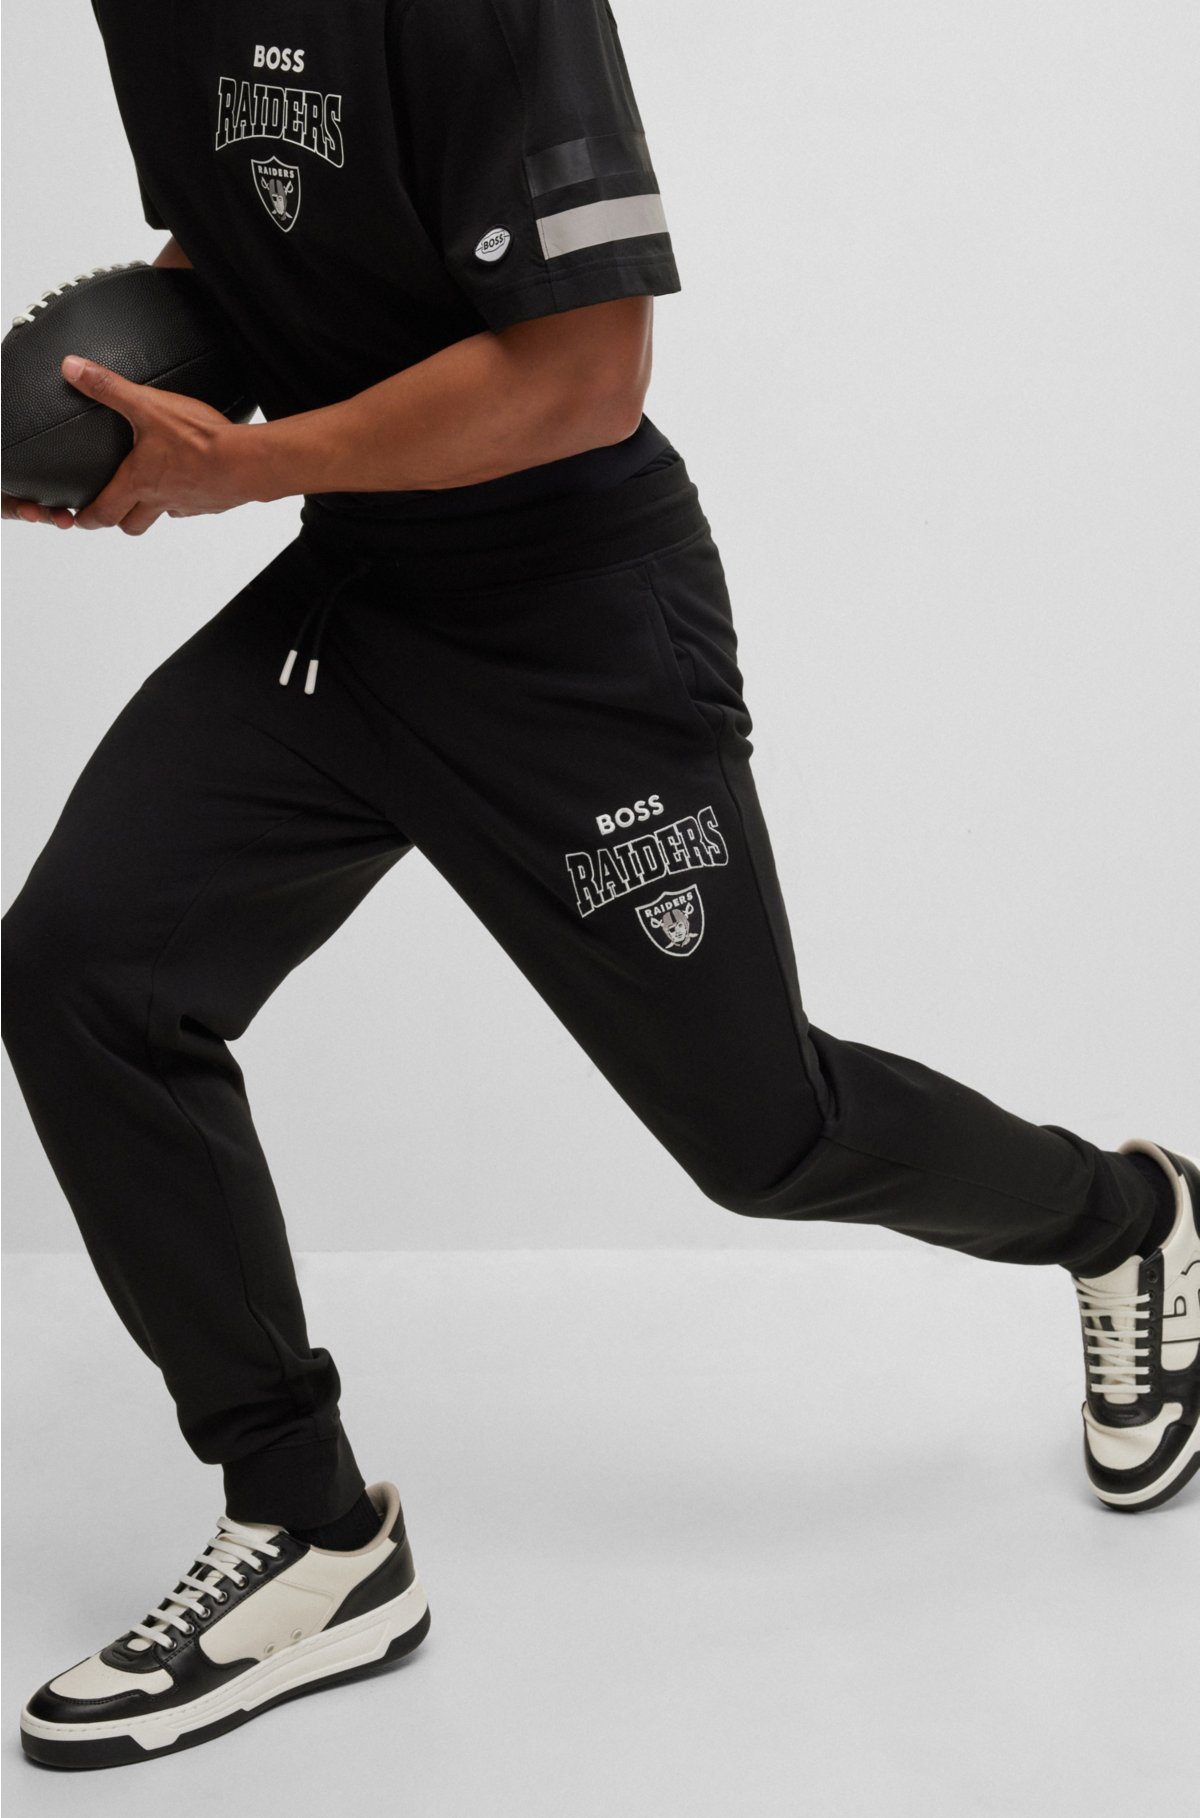 BOSS x NFL cotton-terry tracksuit bottoms with collaborative branding, Raiders